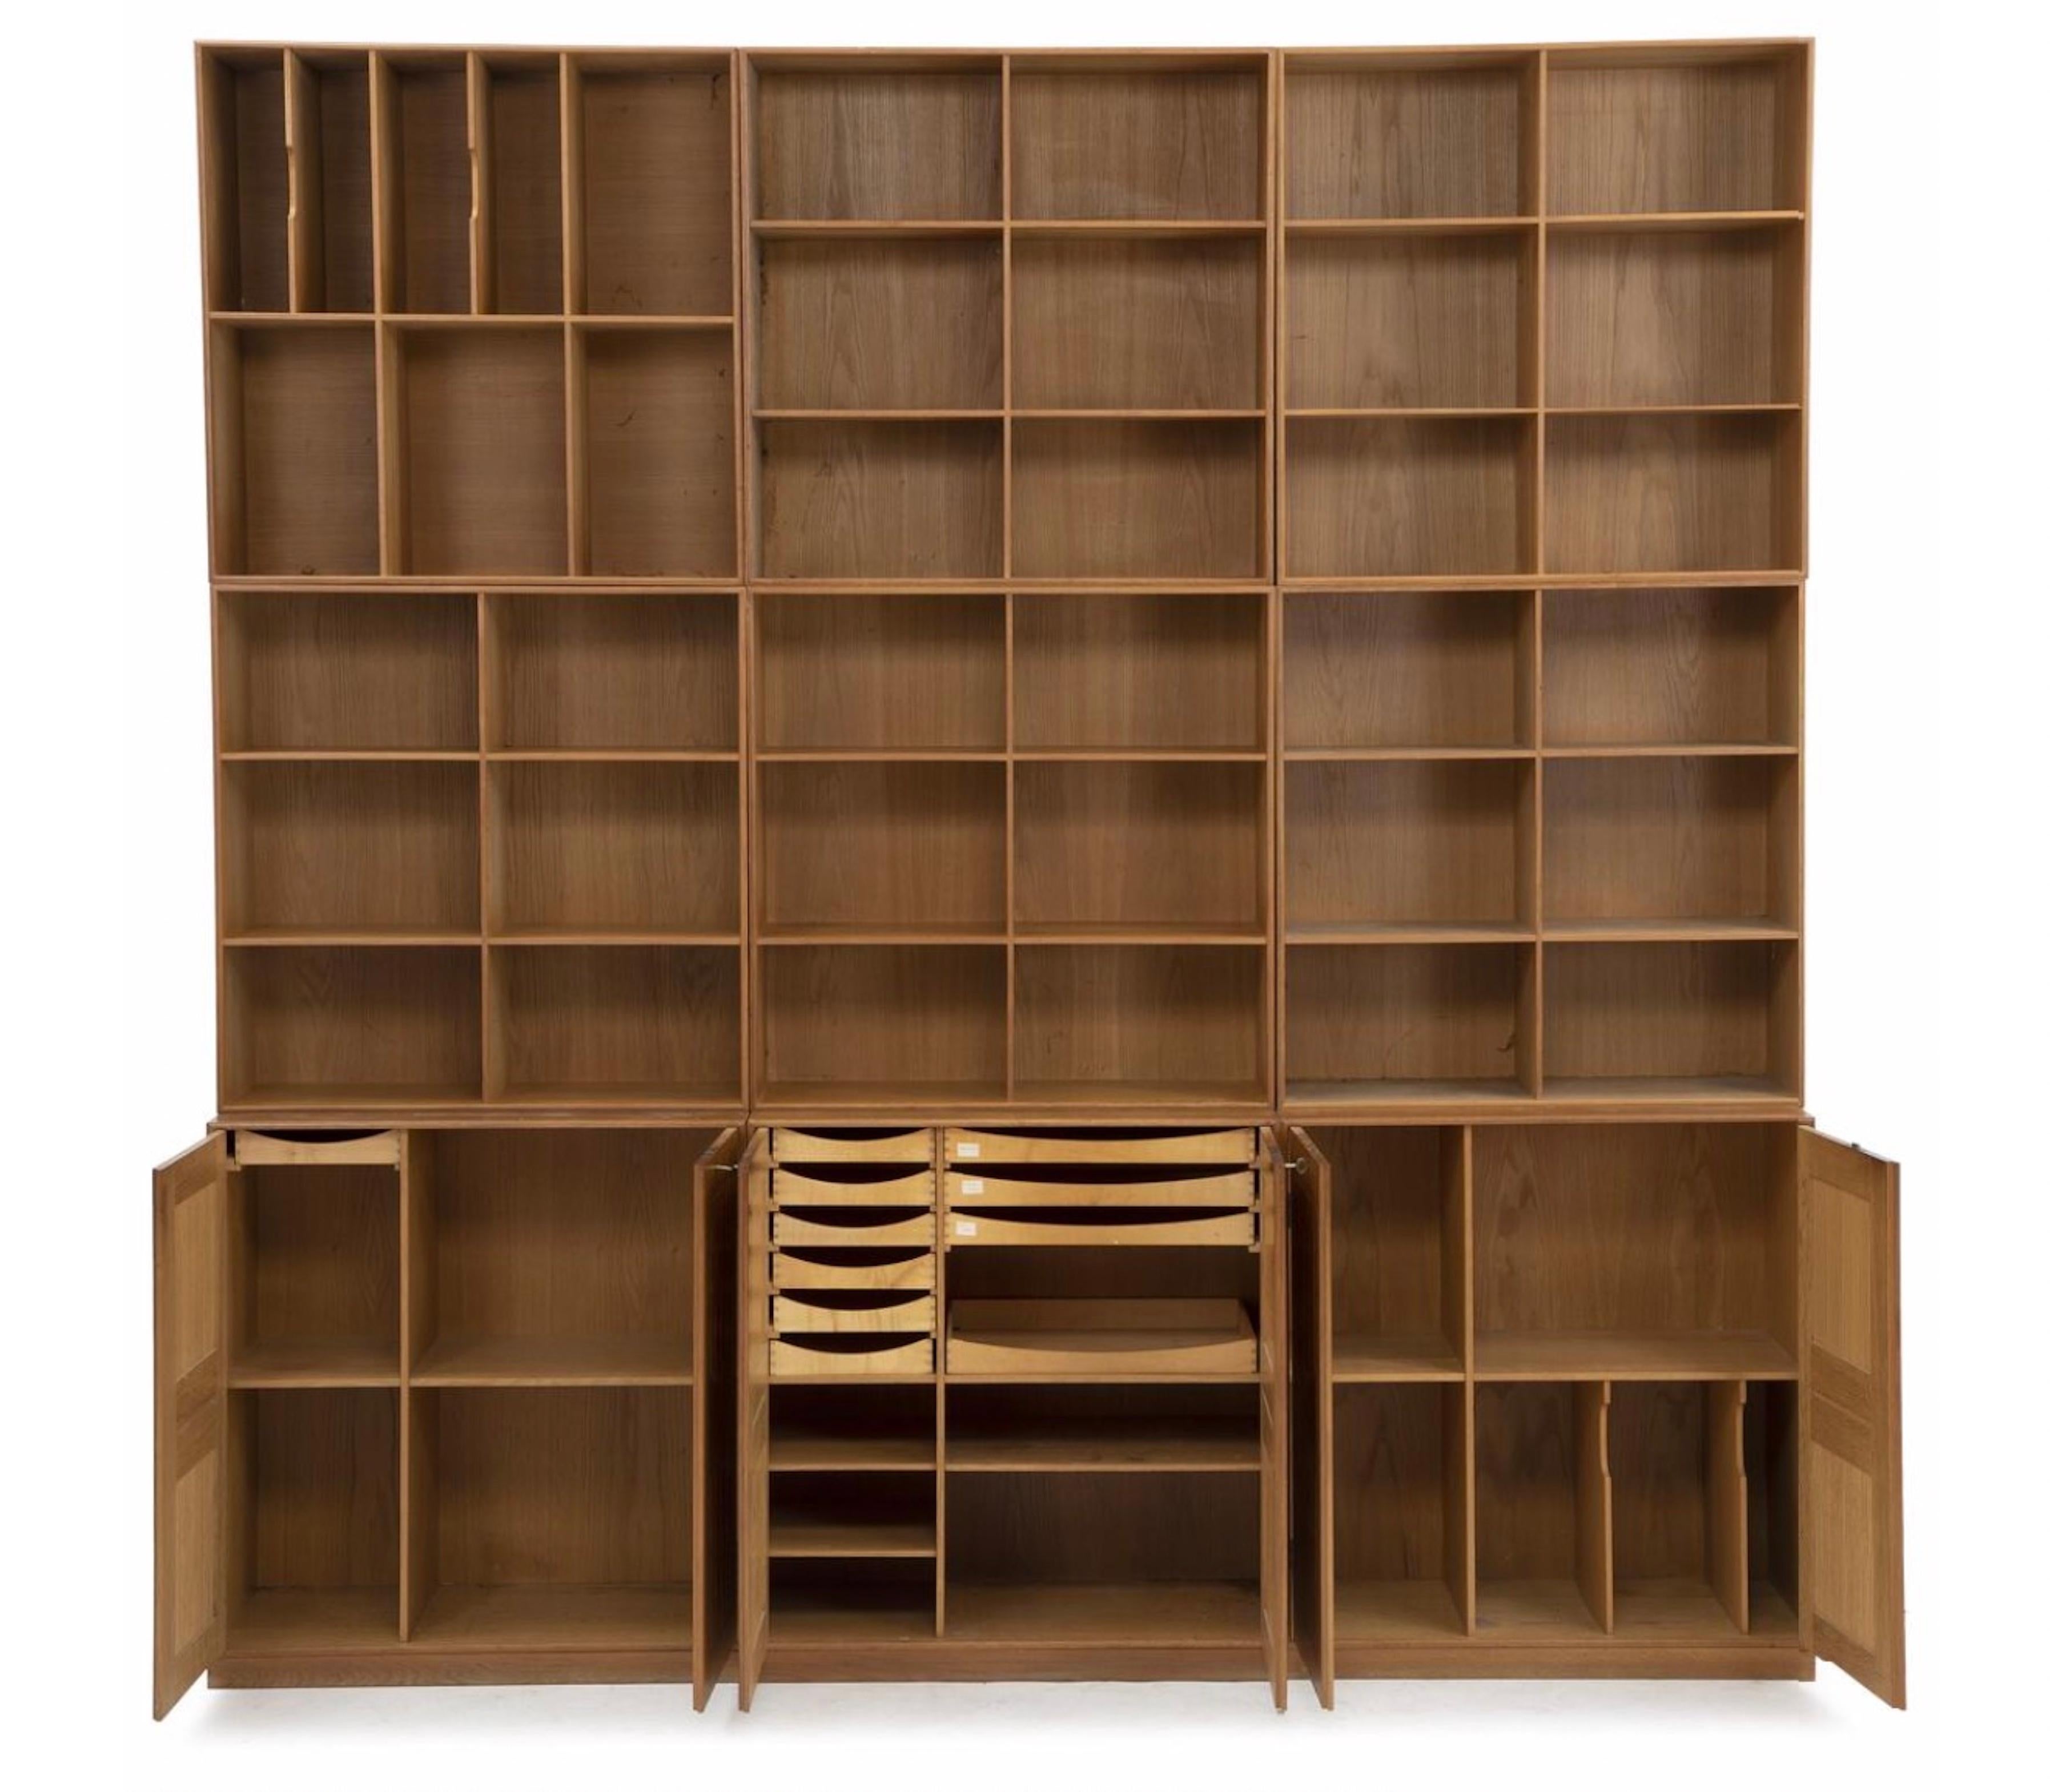 Mogens koch wall unit of solid walnut.Consisting of three cabinets ,six bookcases and three plinths..Brass fittingsEleven pullout trays.Made and marked by Rud Rasmussen.Two keys included.Very good condition.